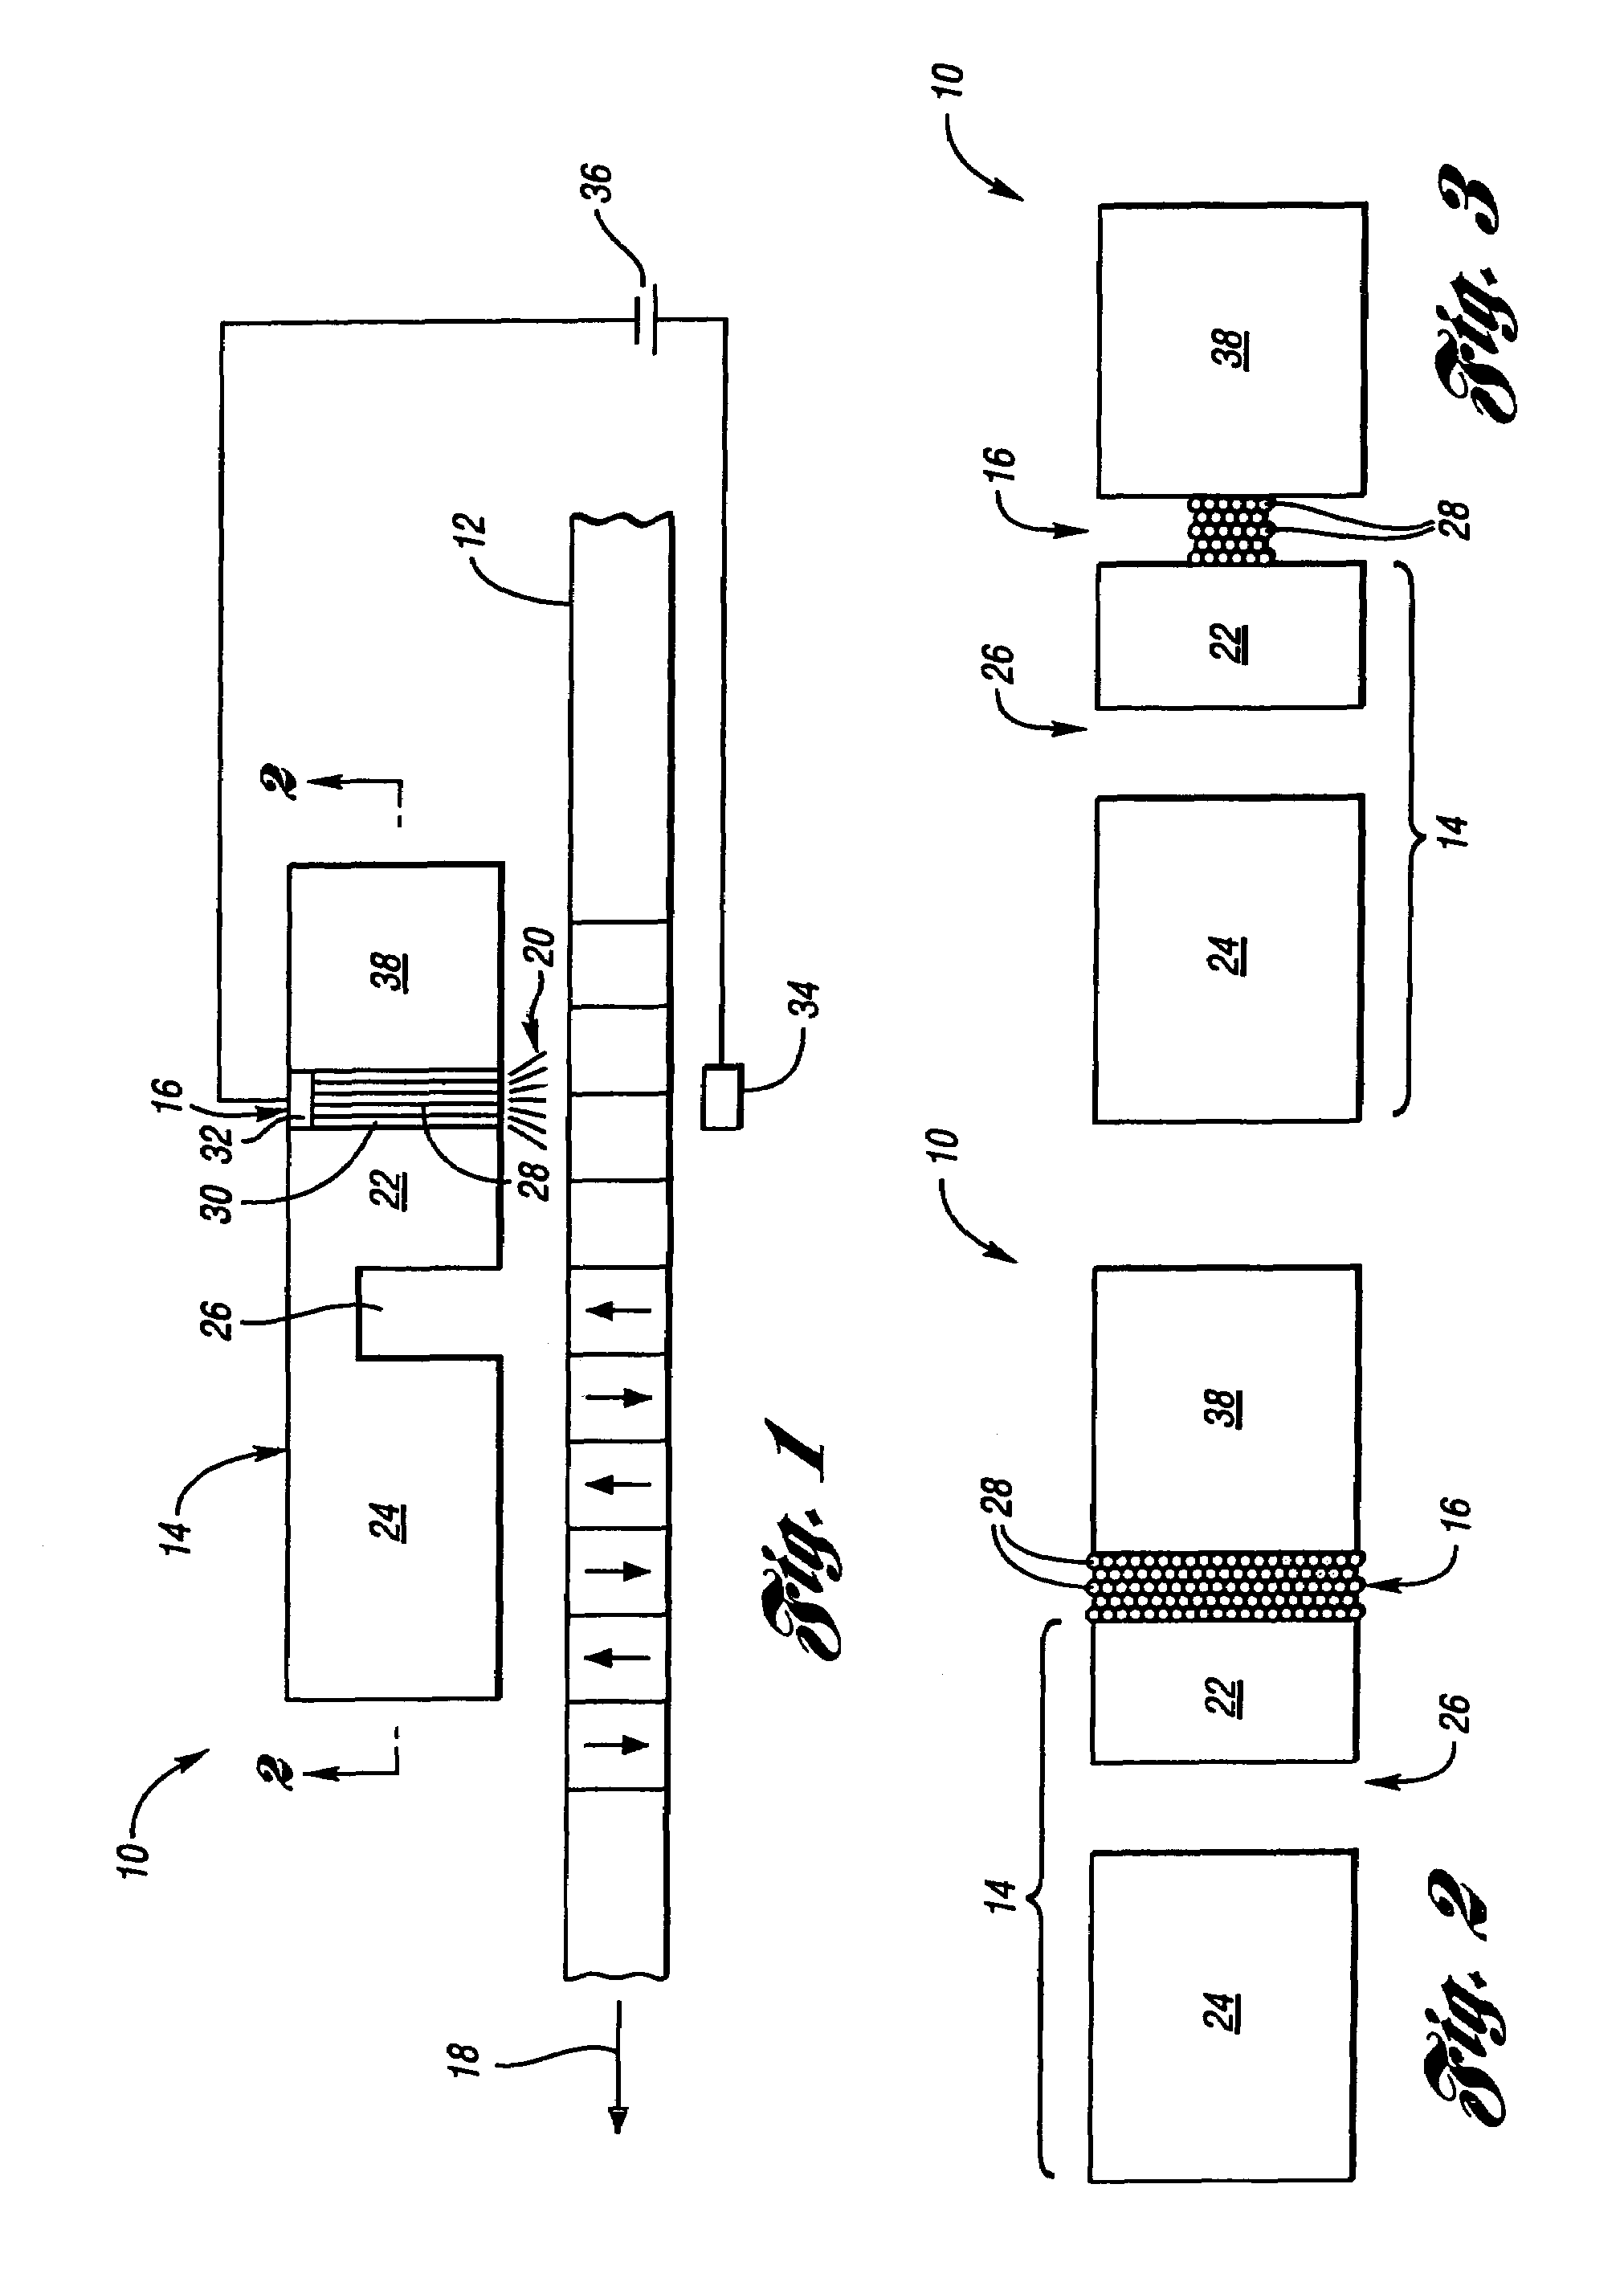 Magnetic recorder having carbon nanotubes embedded in anodic alumina for emitting electron beams to perform heat-assisted magnetic recording